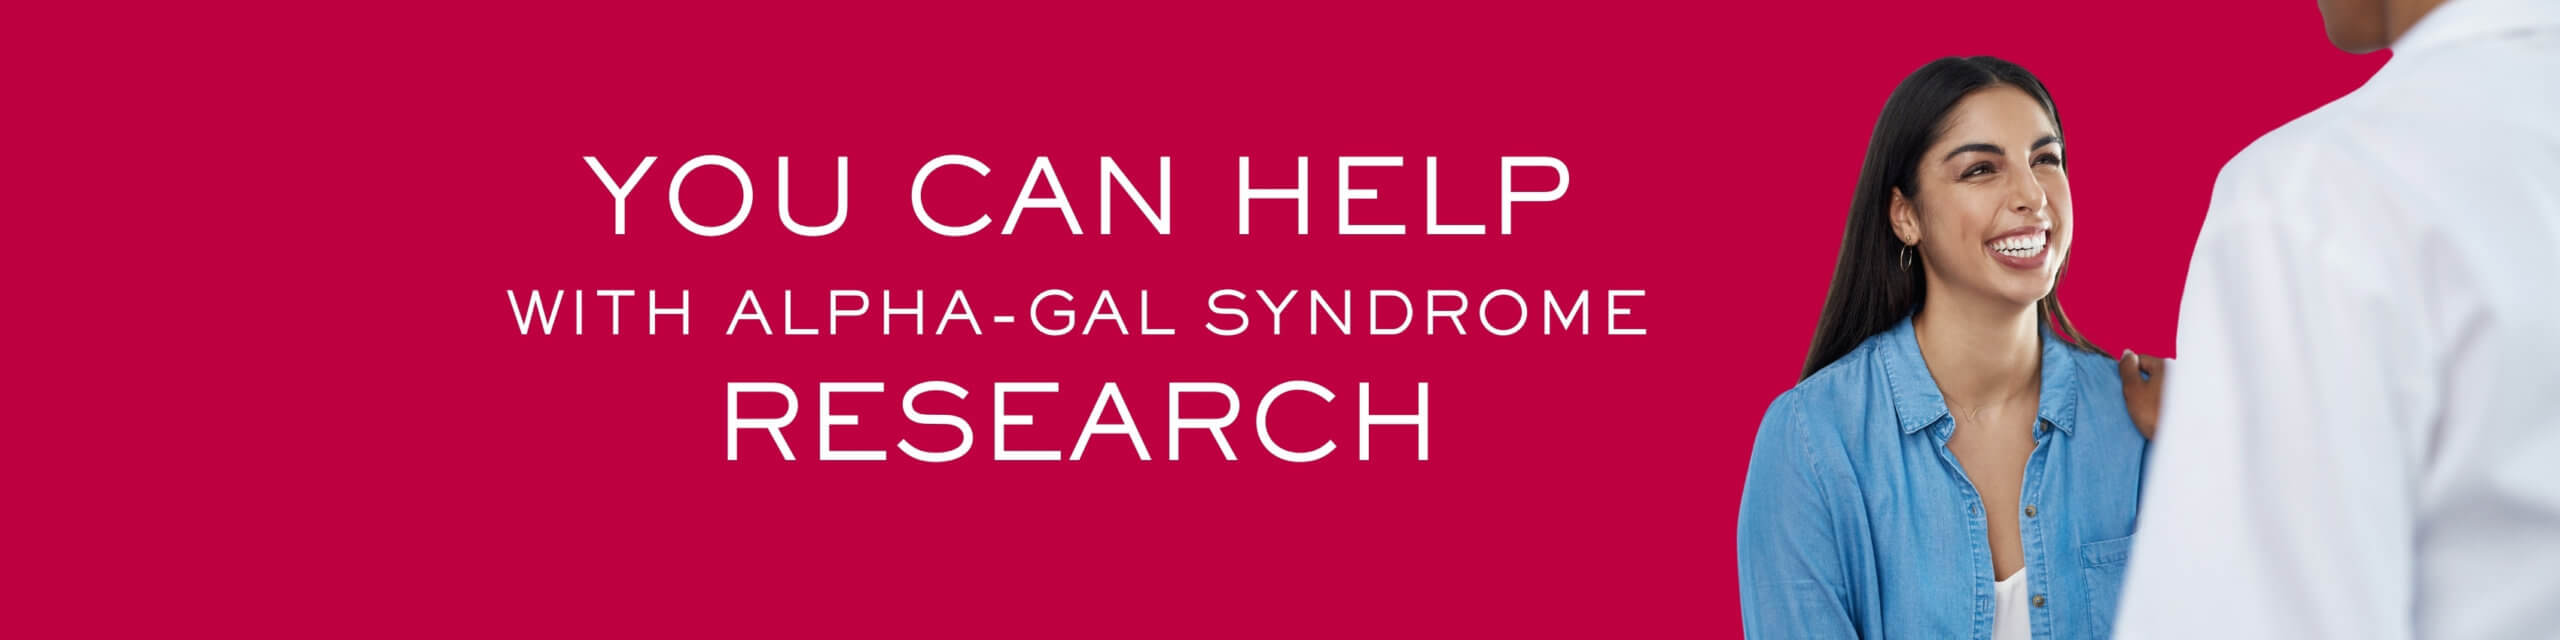 You can help with Alpha-Gal Syndrome